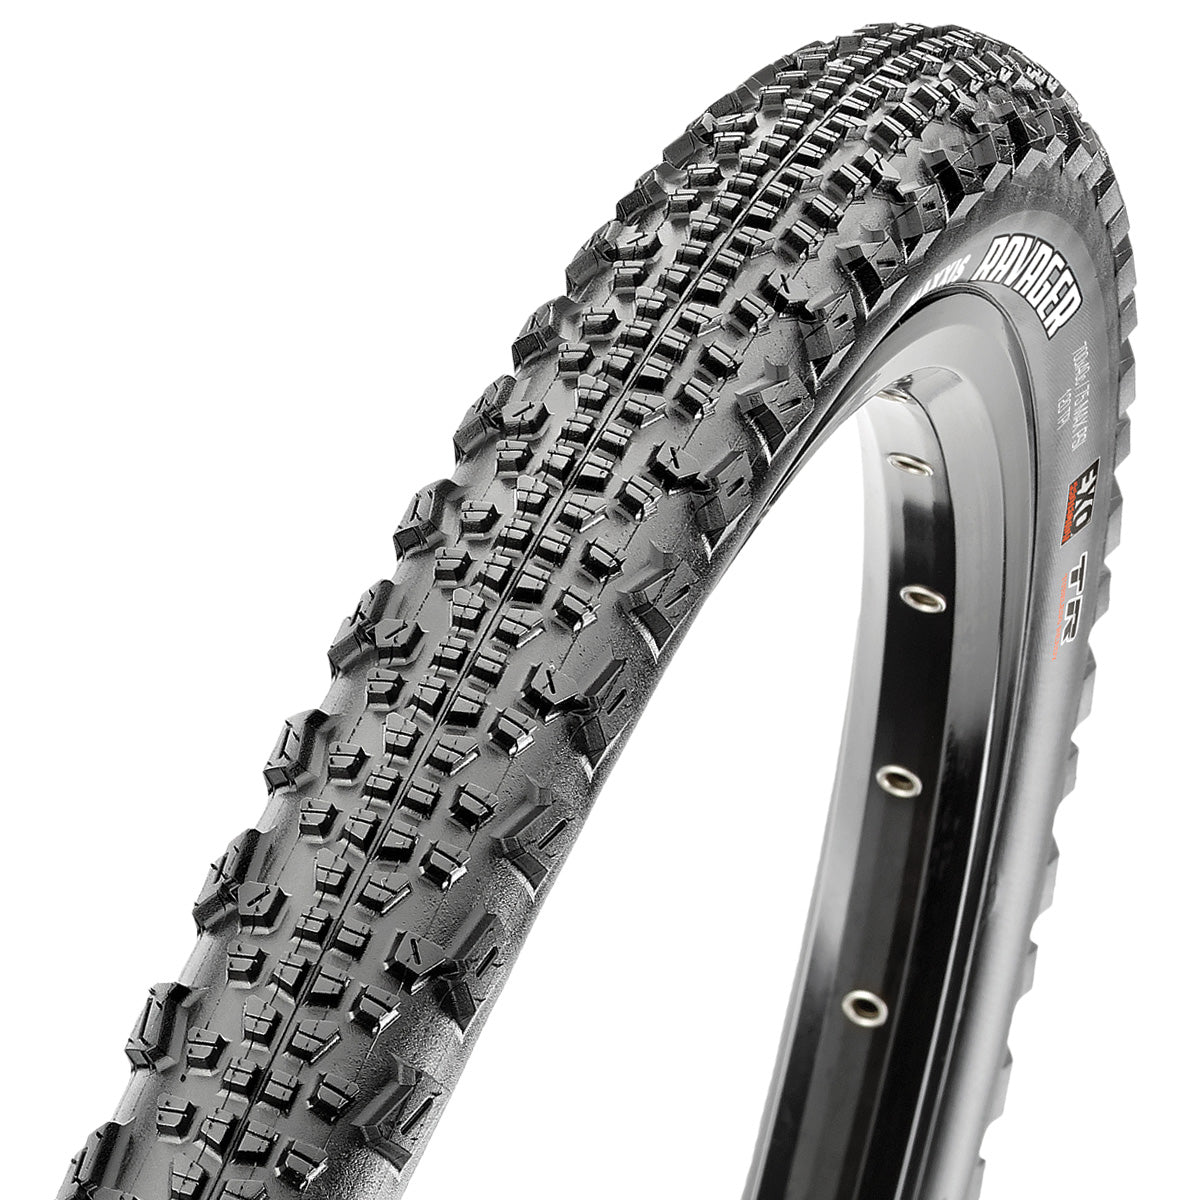 Maxxis Ravager 700x40c tire